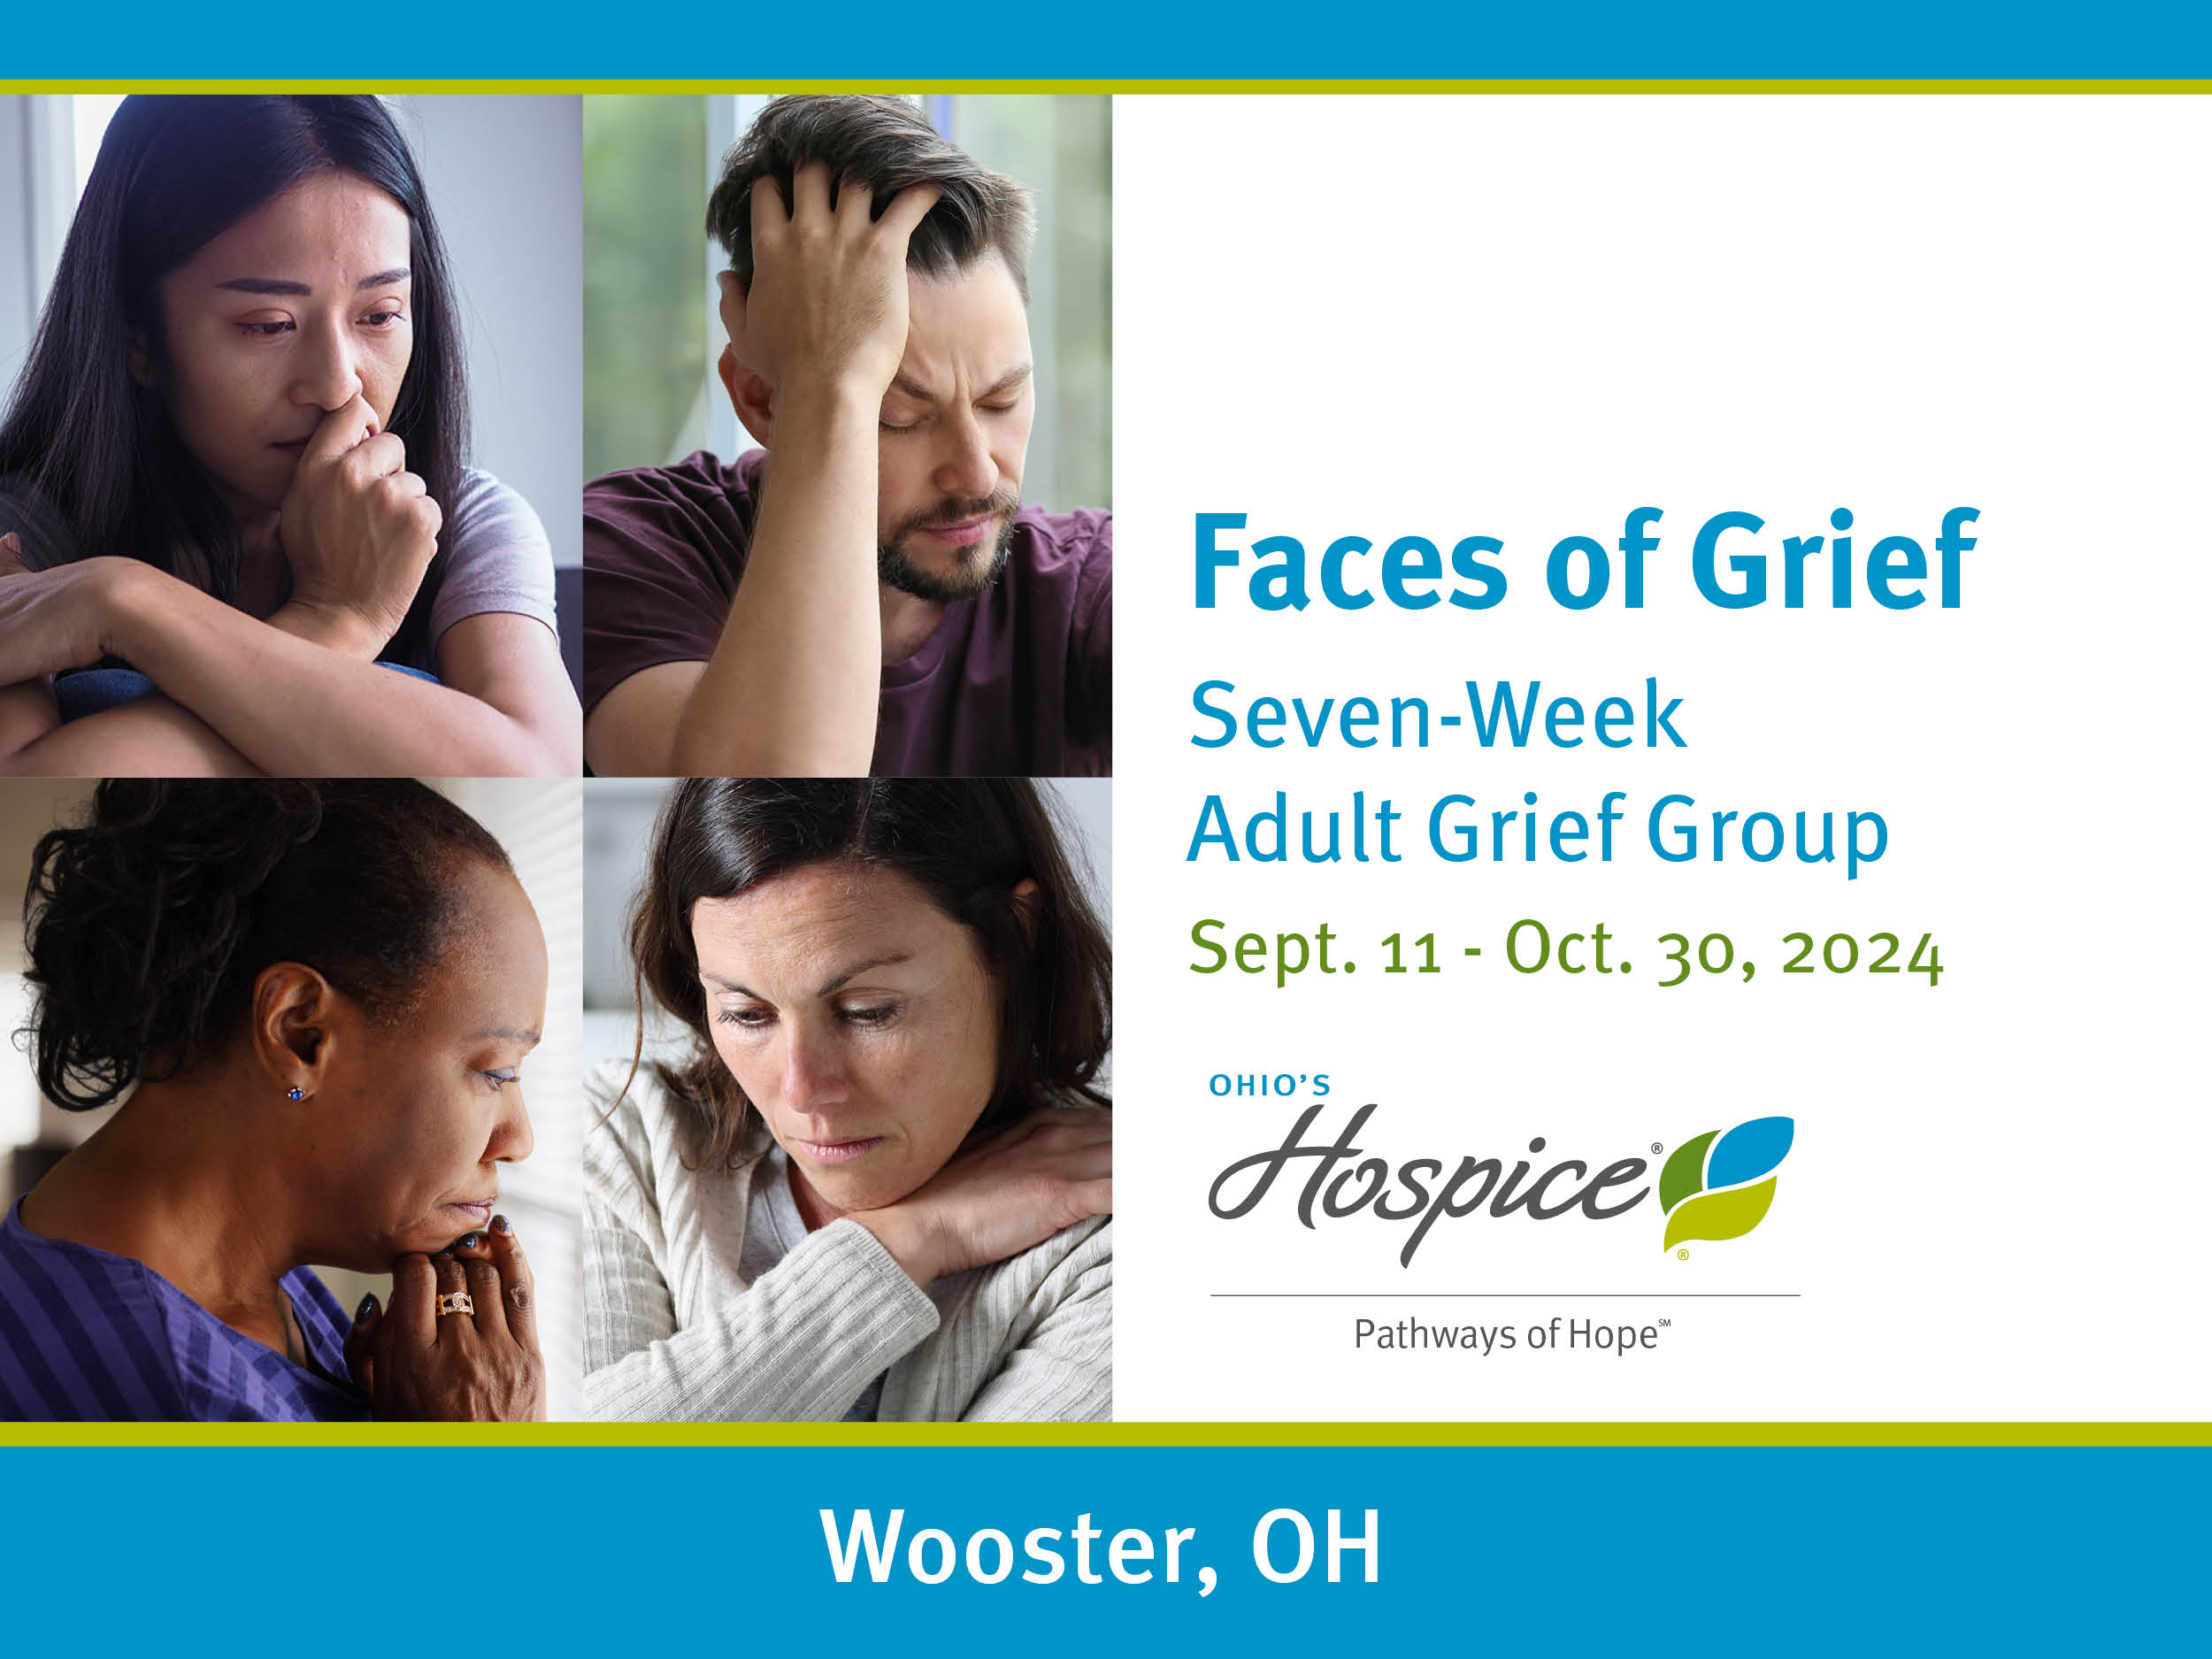 Faces of Grief Seven-Week Adult Grief Group Setp. 11 - Oct. 30, 2024